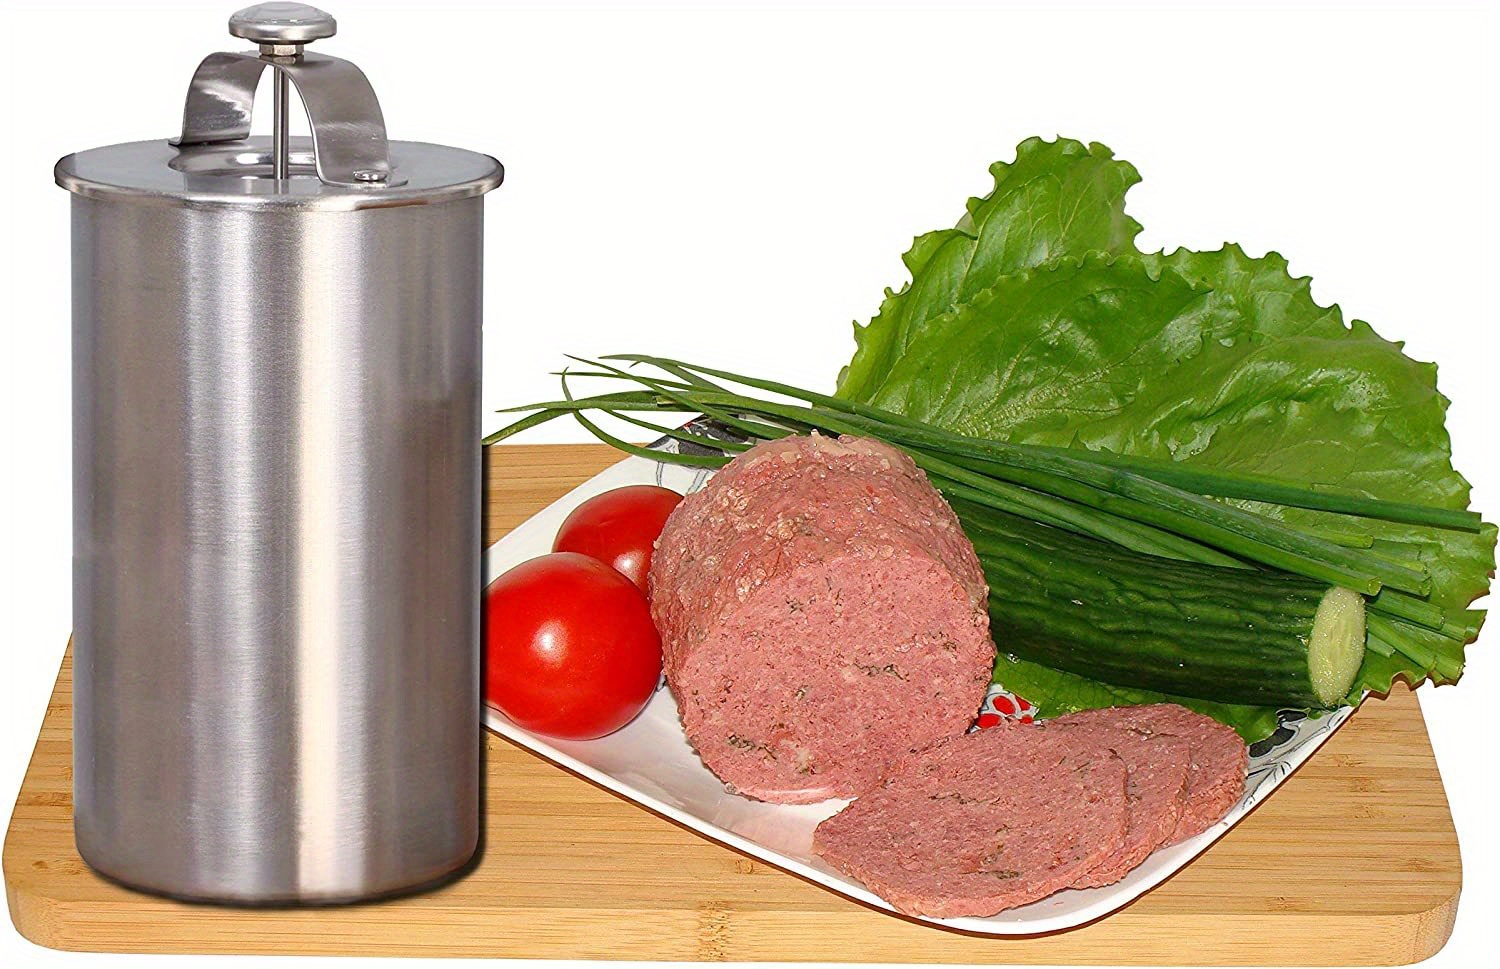 Press Ham Maker, Stainless Steel Meat Press for Making Homemade Deli Meat  With Thermometer